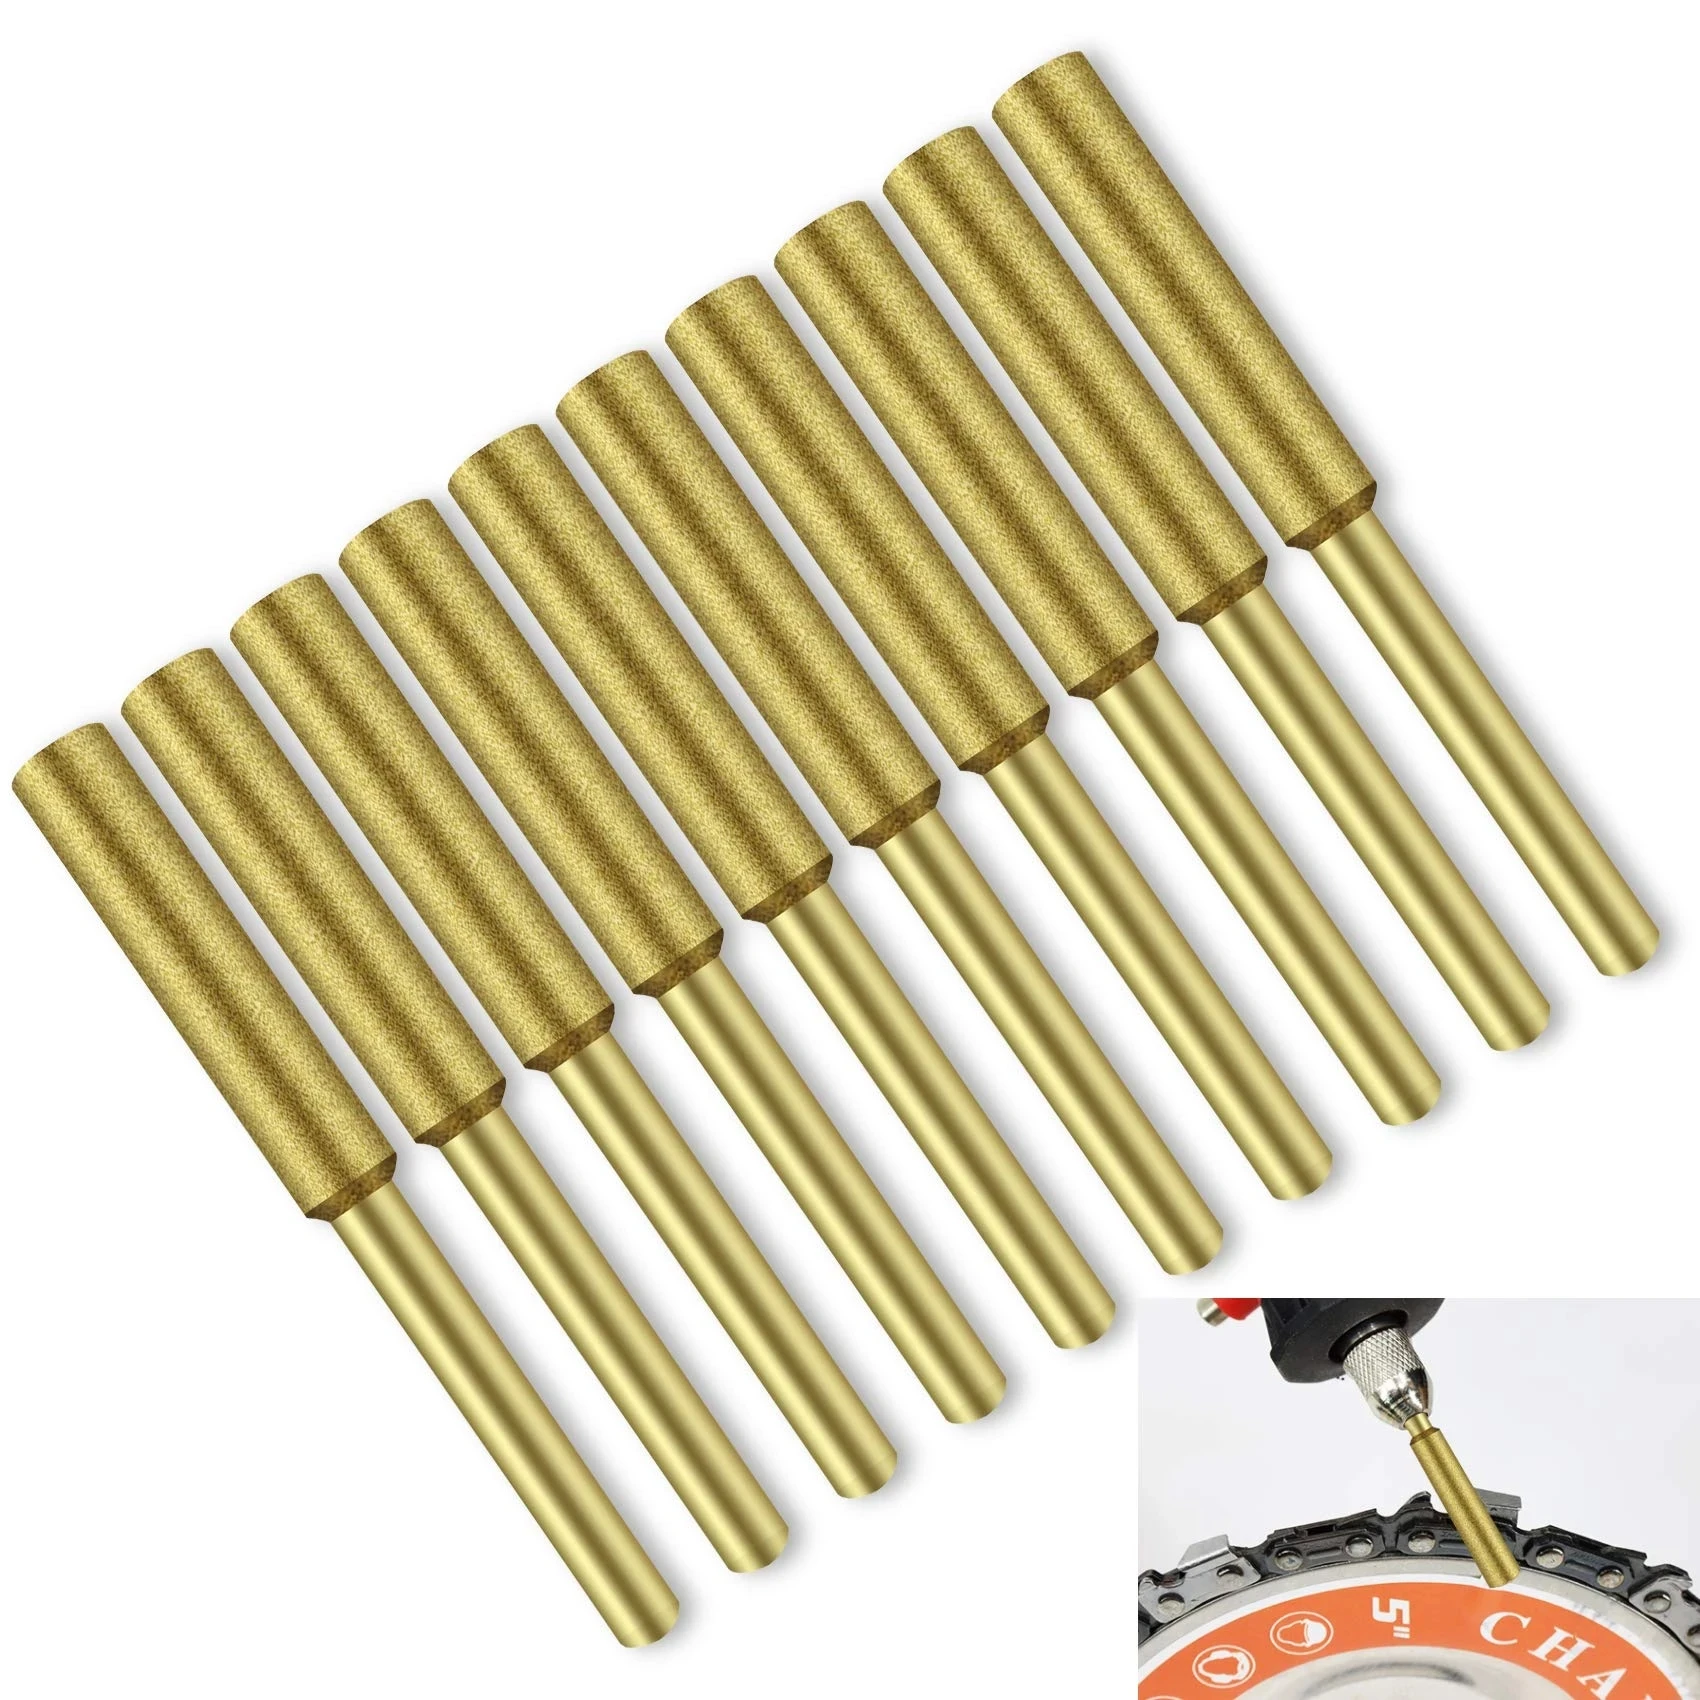 6PC Gold Diamond Coated Cylindrical Burr 4mm 4.8mm 5mm Chainsaw Sharpener Stone File Chain Saw Sharpening Carving Grinding Tool